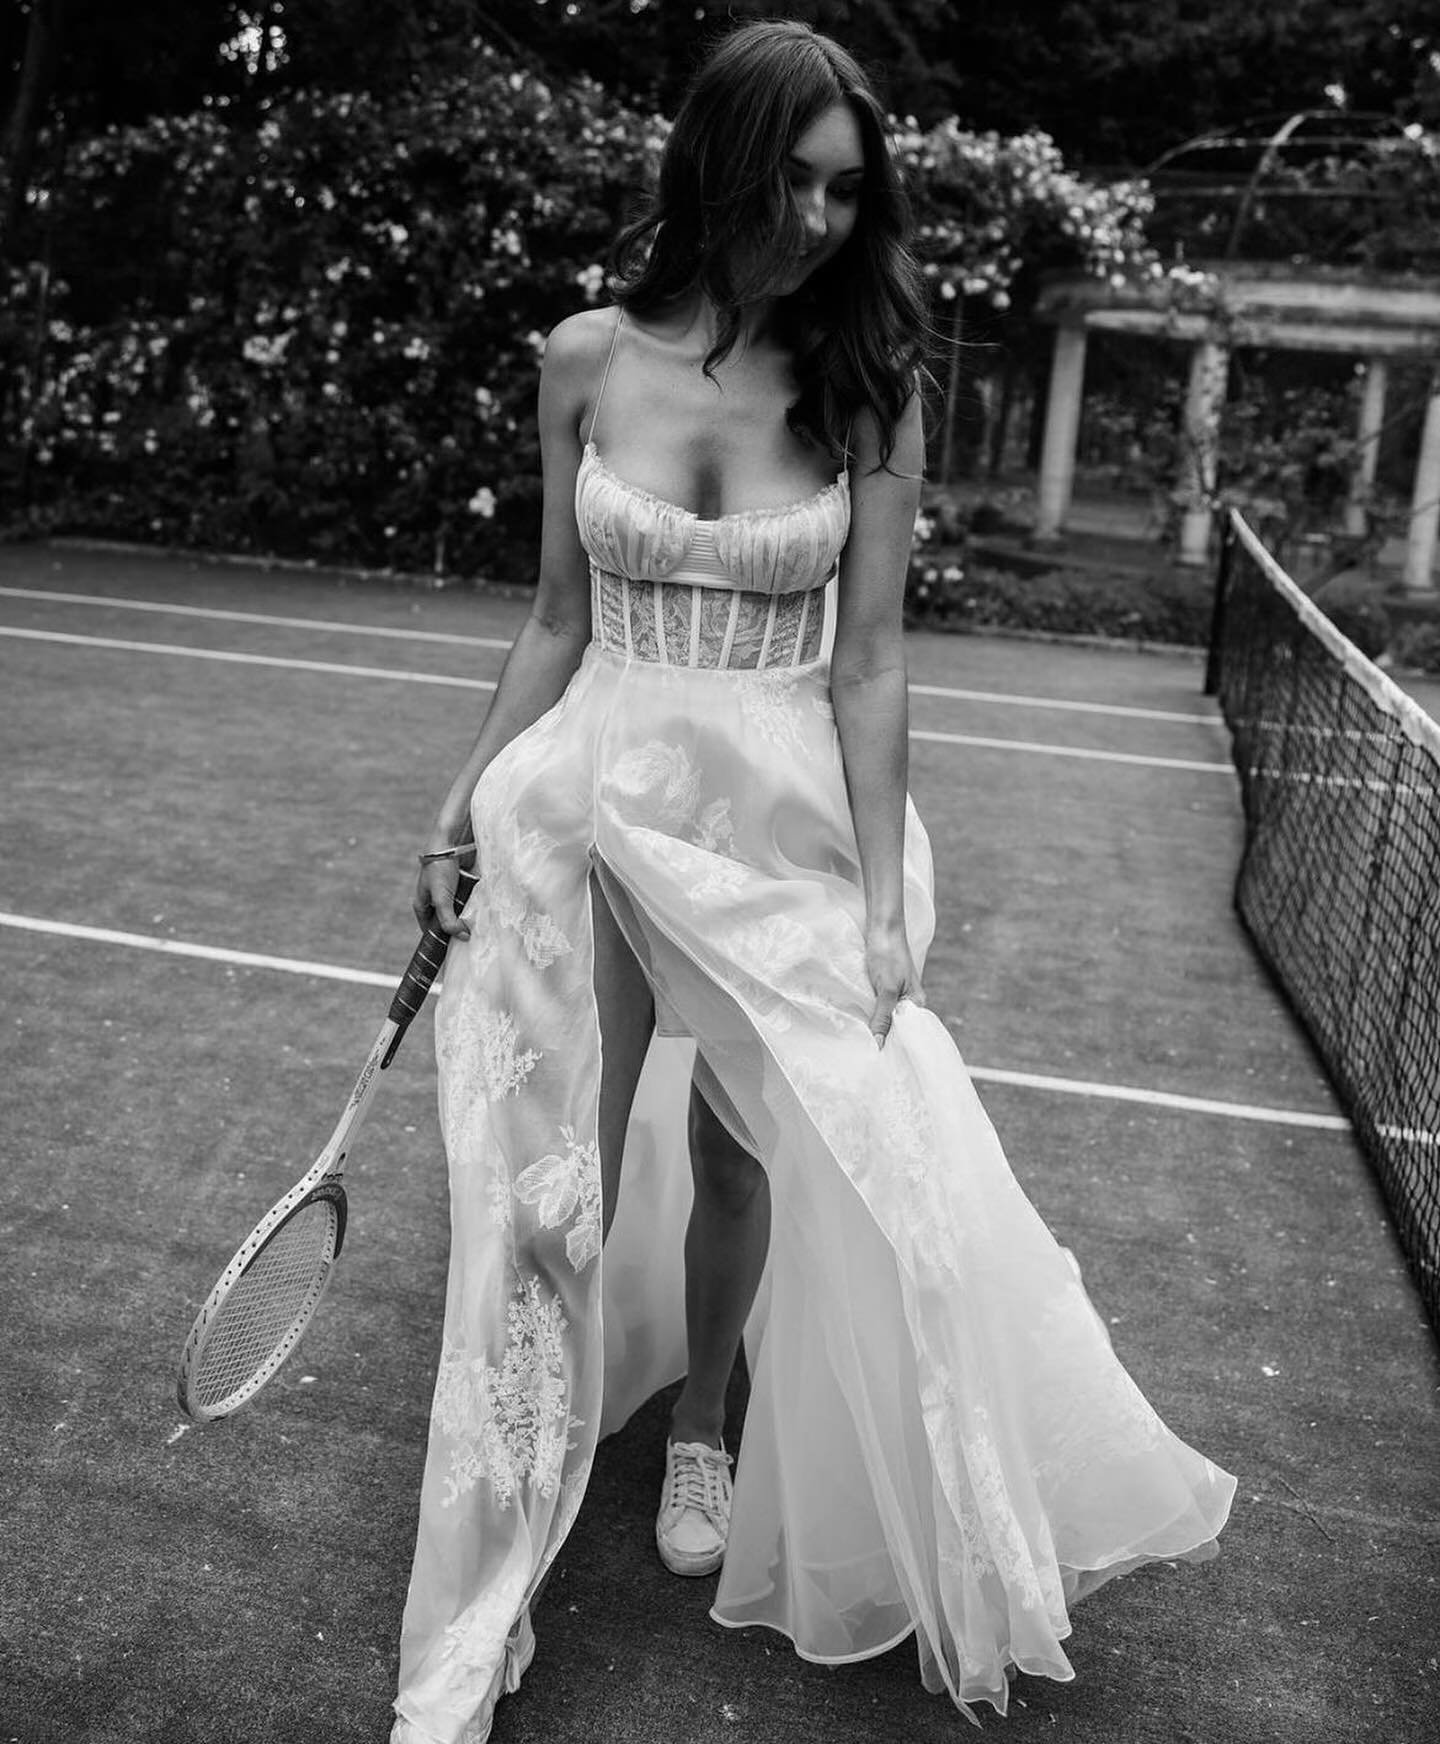 J. A N D R E A T T A ~ Serving some serious bridal looks this wedding season with @j.andreatta_. 🎾

Discover the latest arrivals from the designer, including all of our stylists past season favorites. Tap the link in bio to schedule your appointment